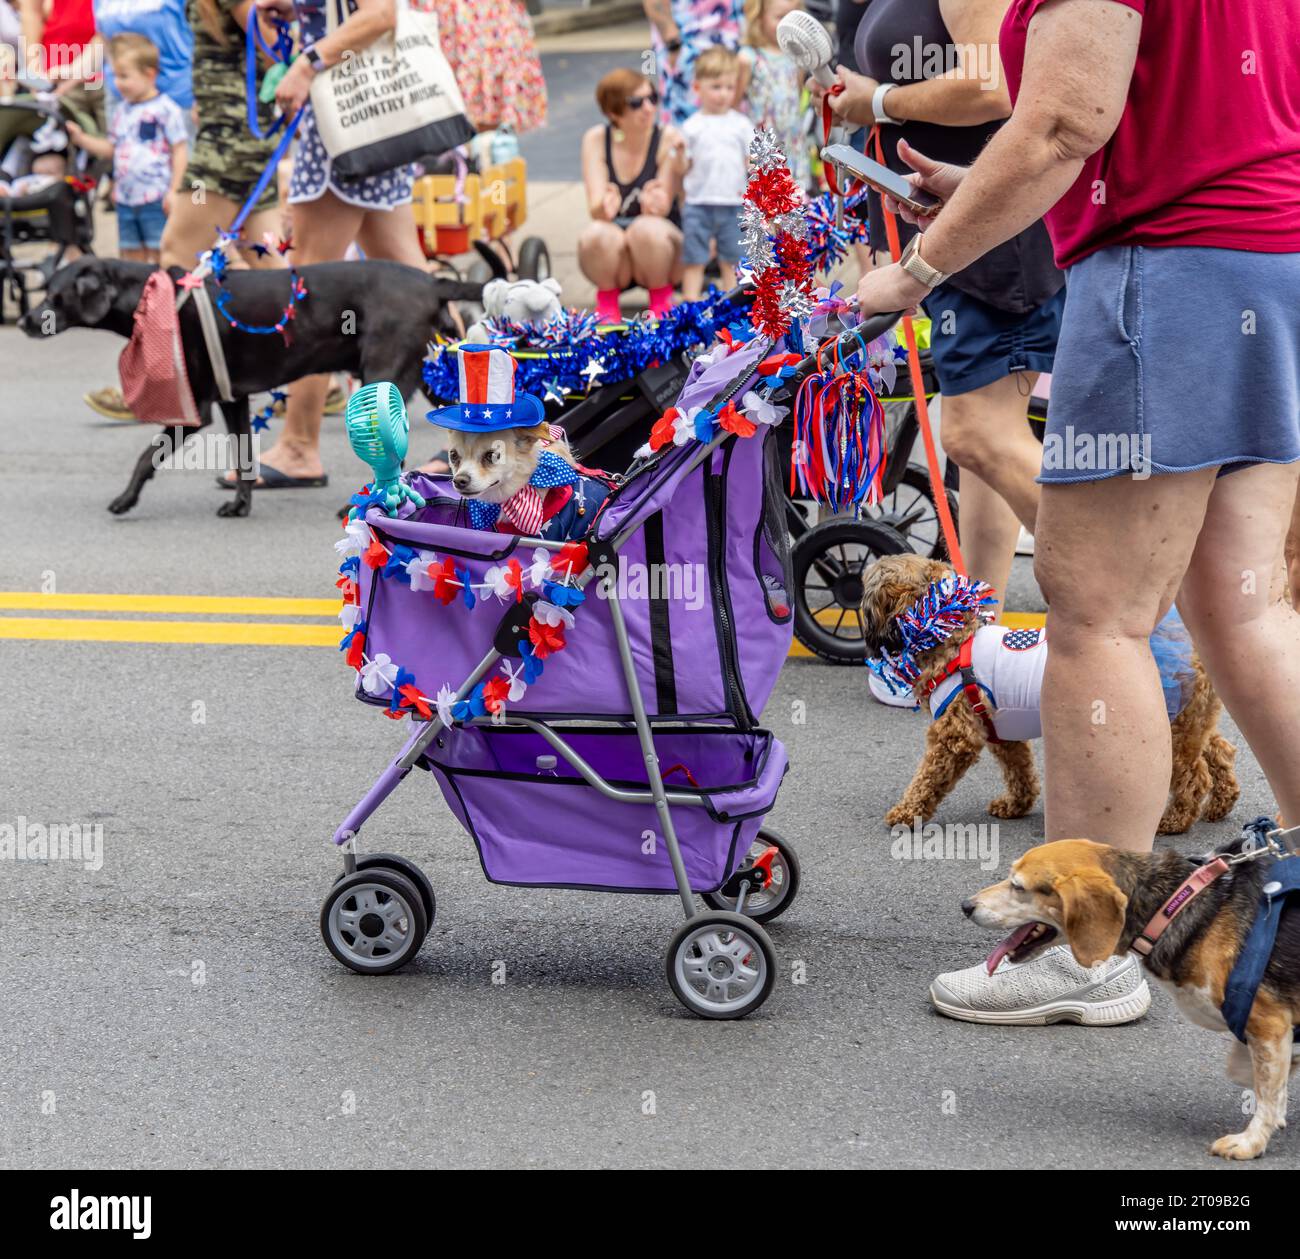 A small dog in costume riding in a purple baby carriage in a parade Stock Photo